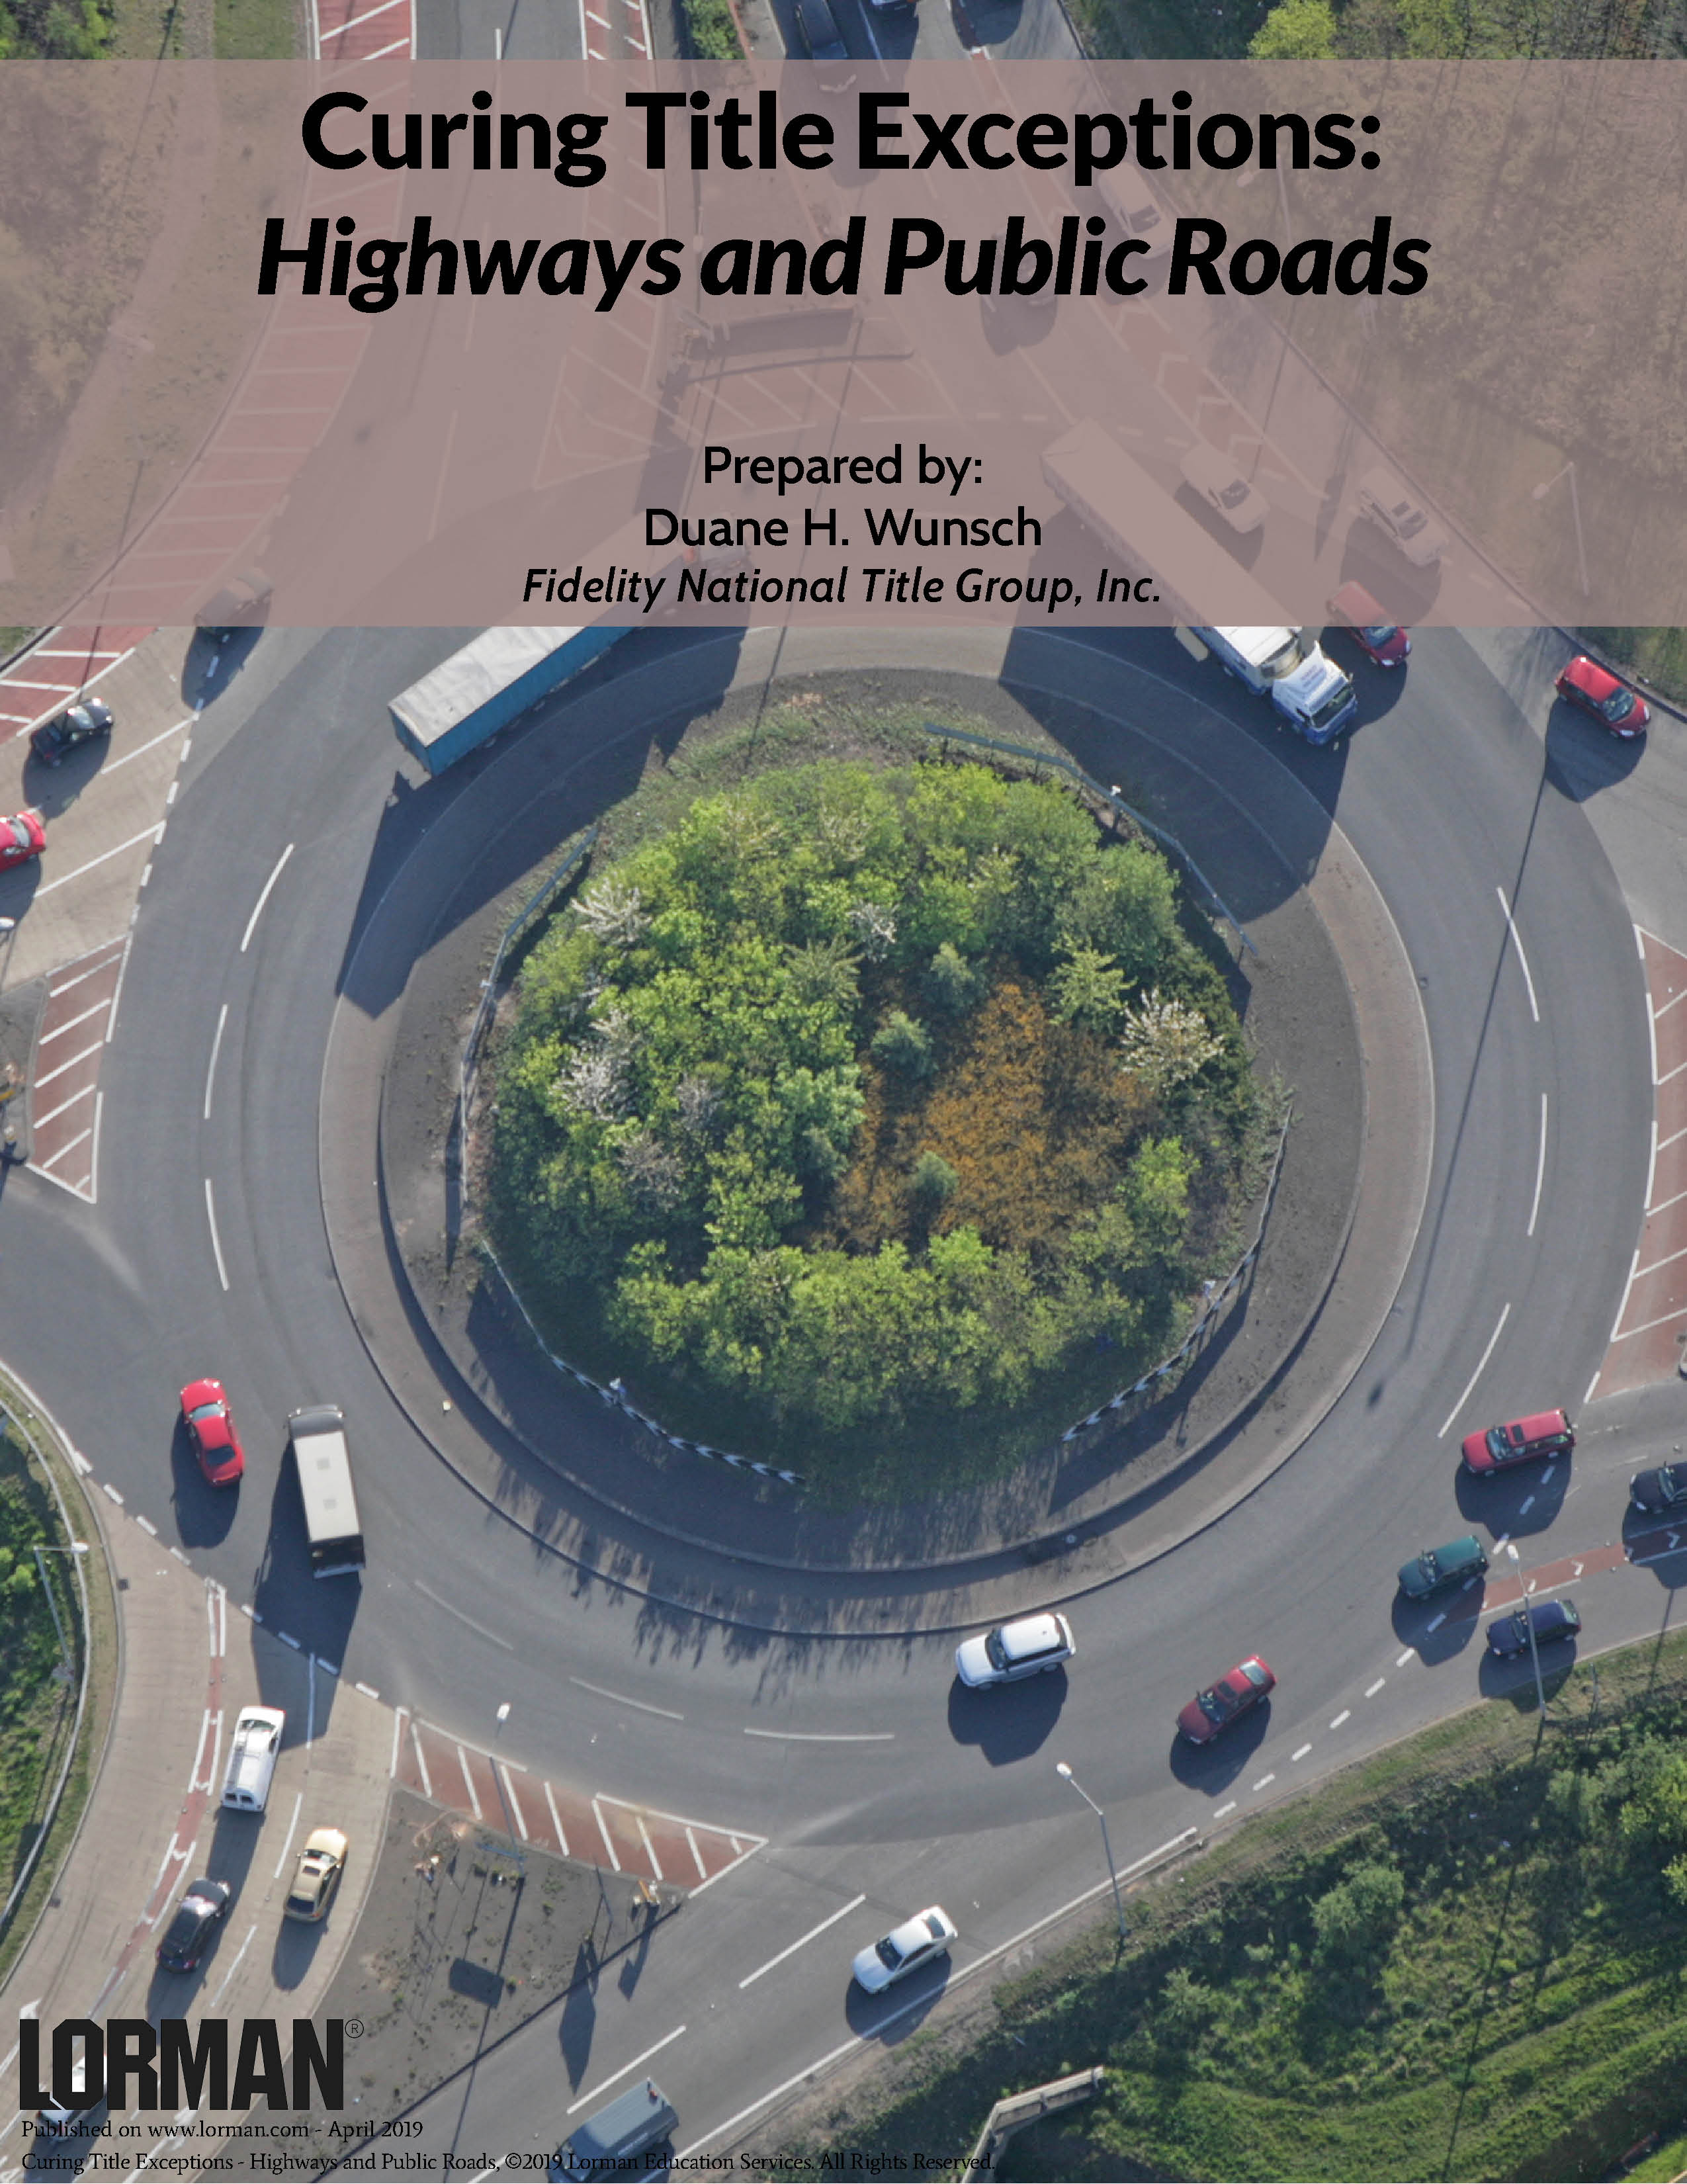 Curing Title Exceptions: Highways and Public Roads